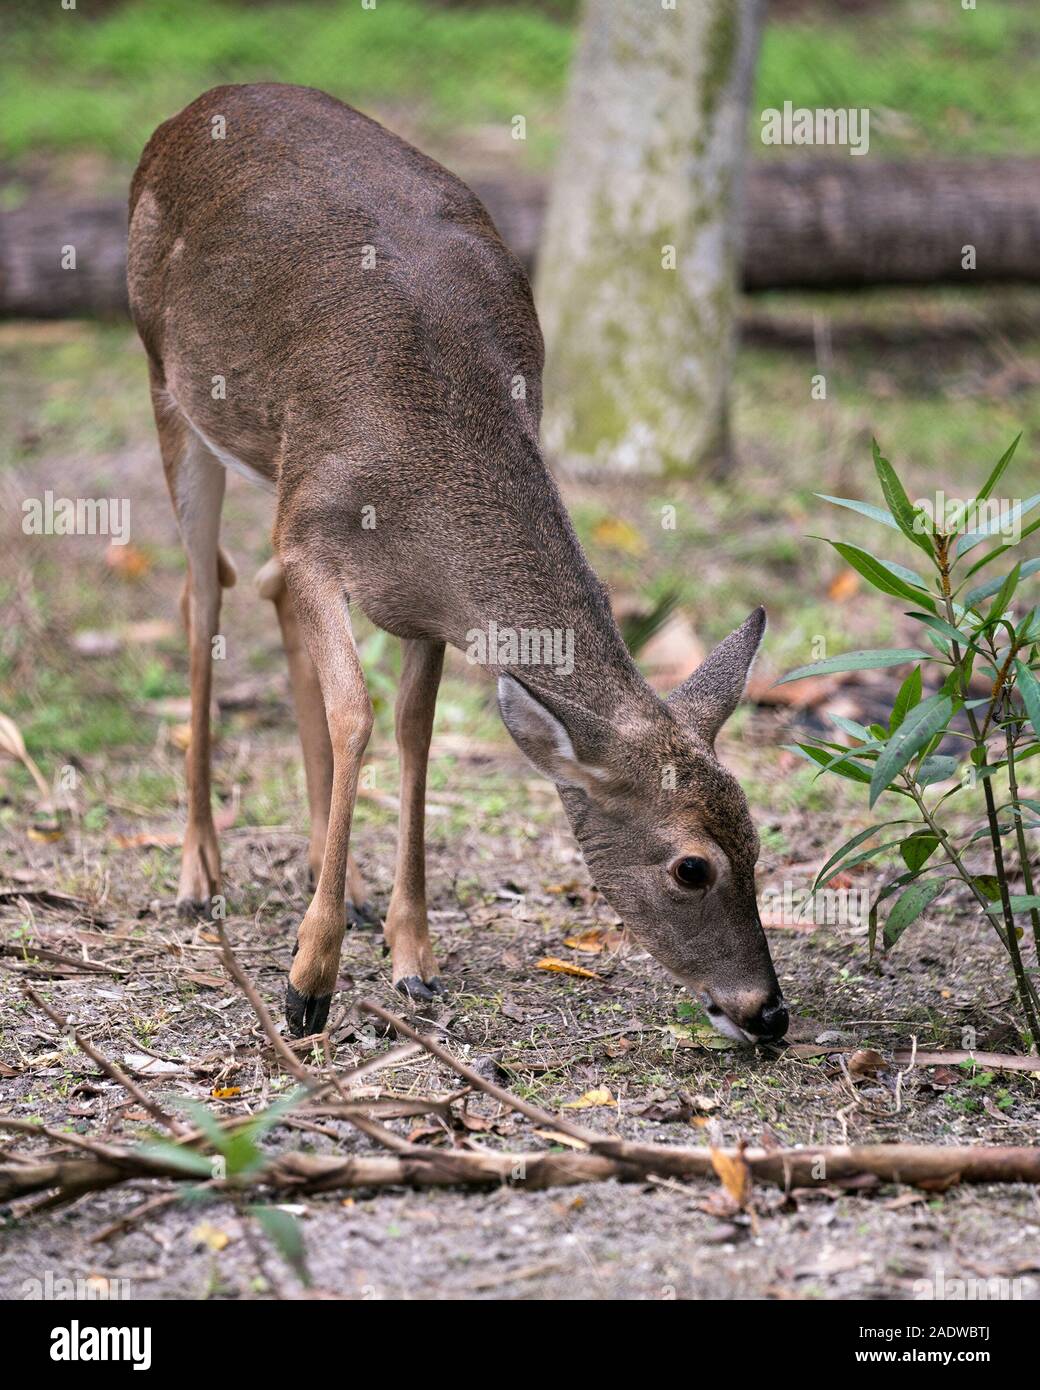 Deer animal White-tailed dear head close-up profile view with foliage background exposing its head,  ears, eye, mouth, nose, brown fur. Stock Photo